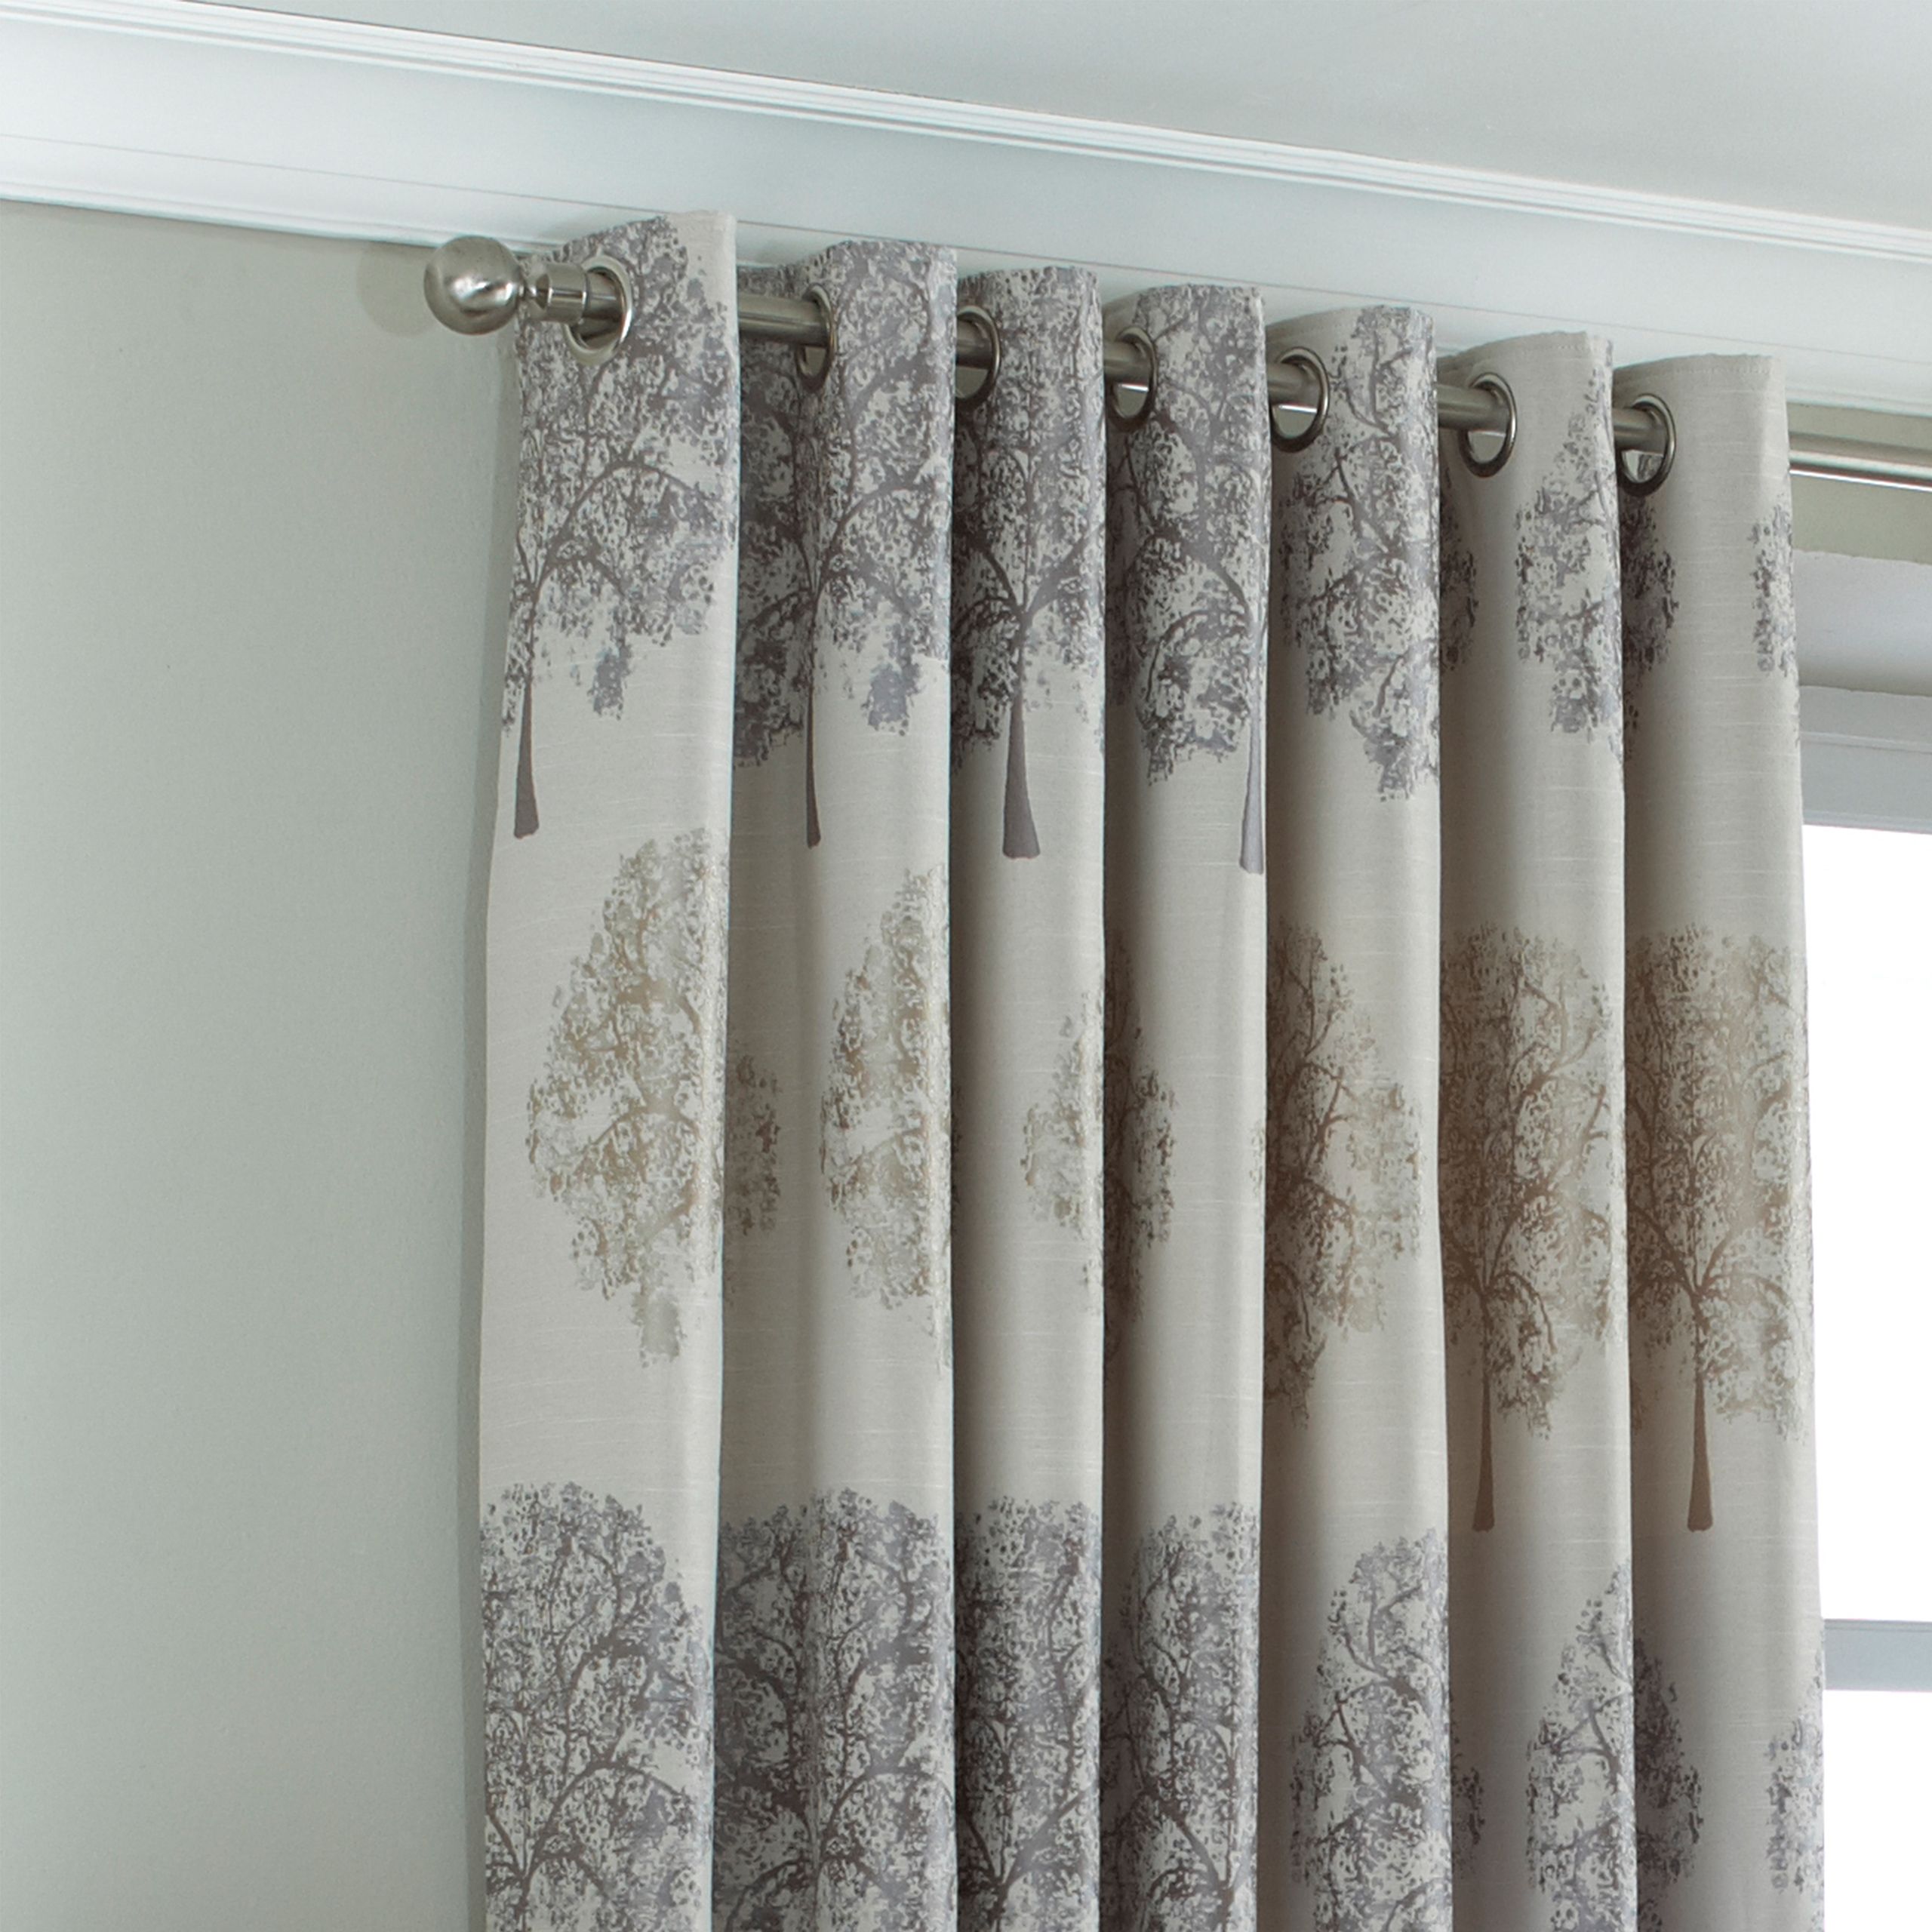 The Oakdale curtains feature a timeless design of oaktree motifs.  Made of 100% robust polyester these curtains don’t stain easily. With stainless steel eyelet holes the Oakdale curtains are easy to hang and only require a curtain pole for installation.